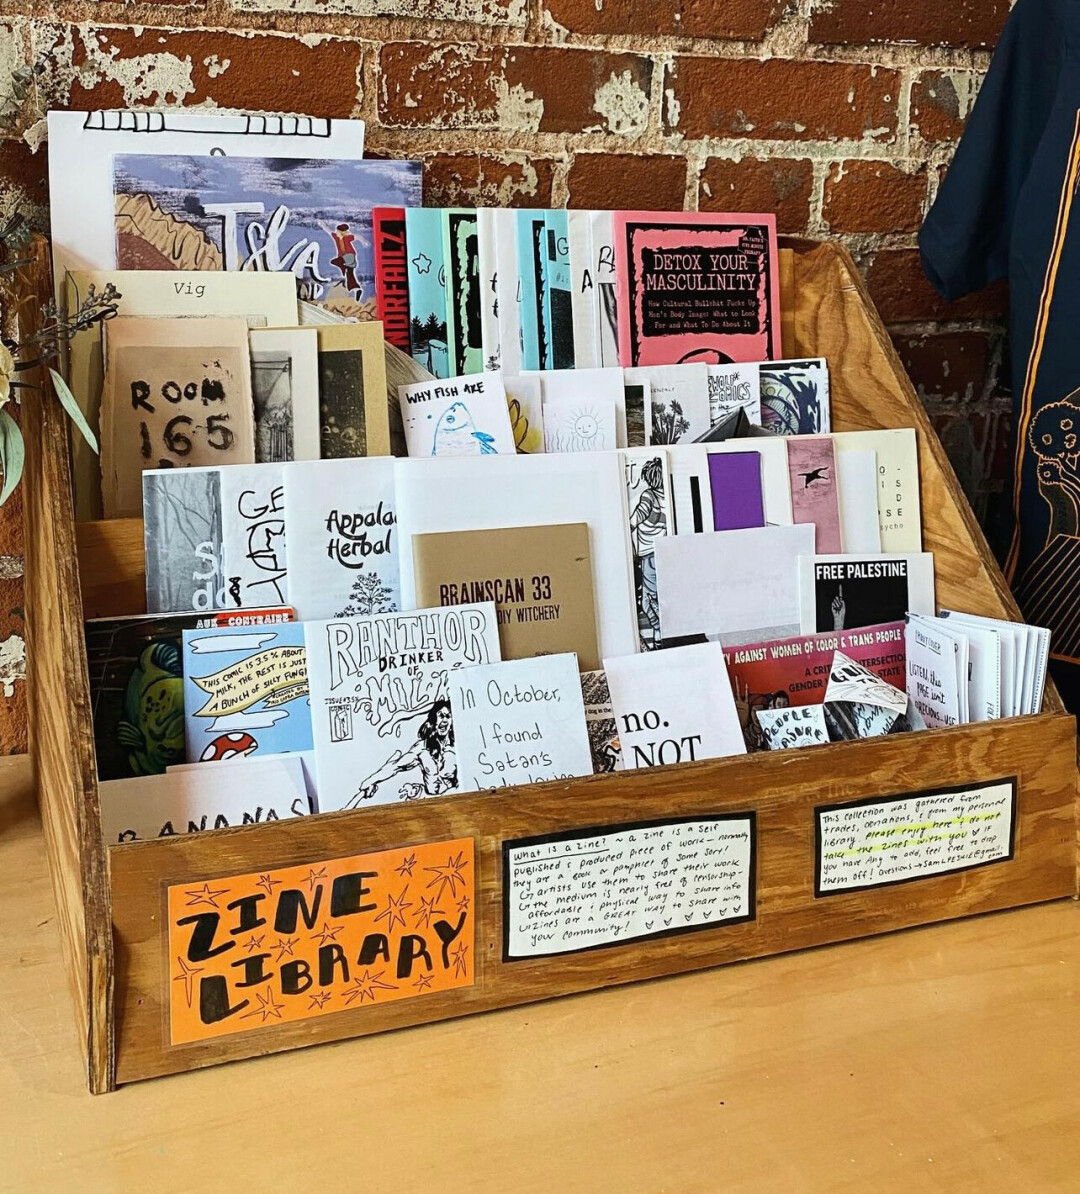 ZINE SCENE. SHIFT Cyclery & Coffee Bar offers a small zine library showcasing local artists. (Photos via Facebook)